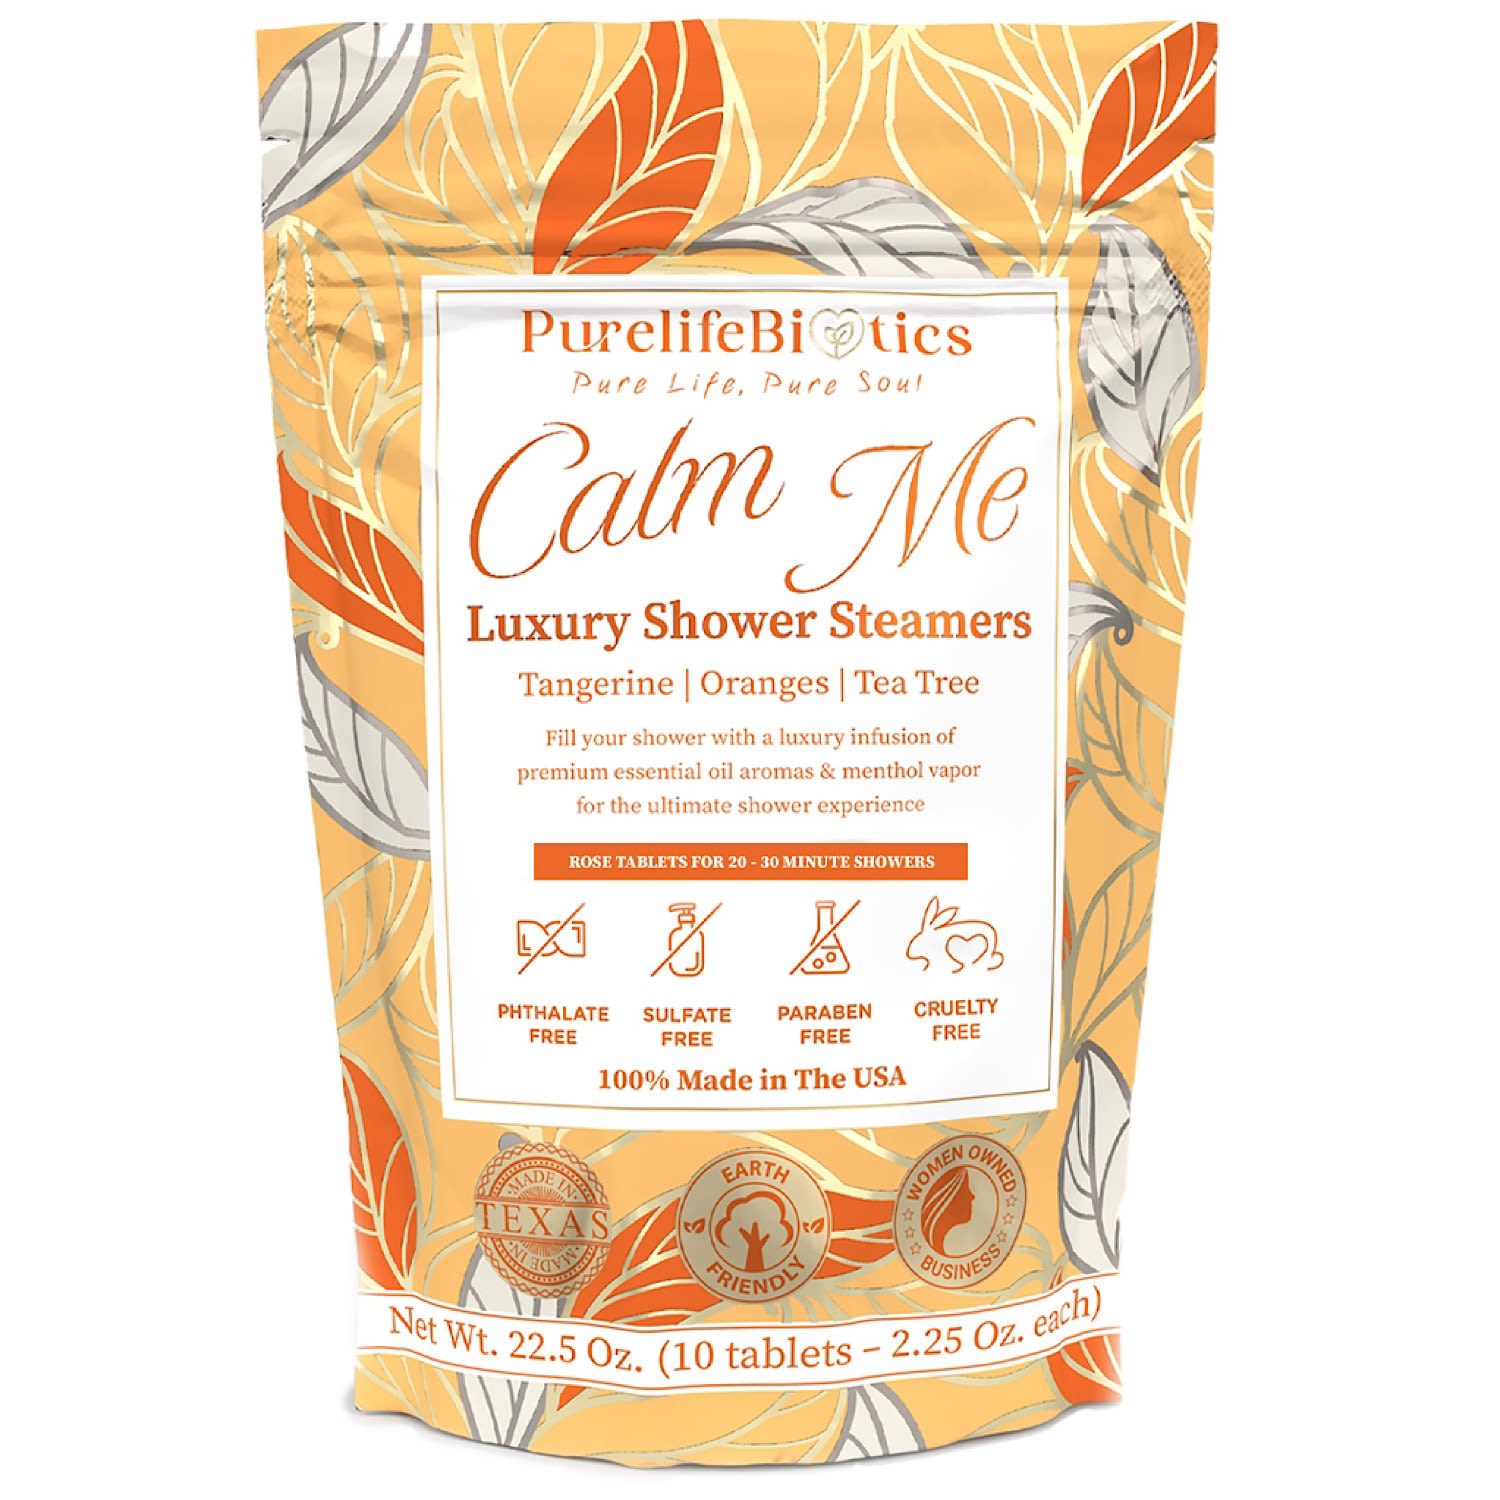 Calm Me Shower Steamers - Rose Shaped One Size Purelifebiotics